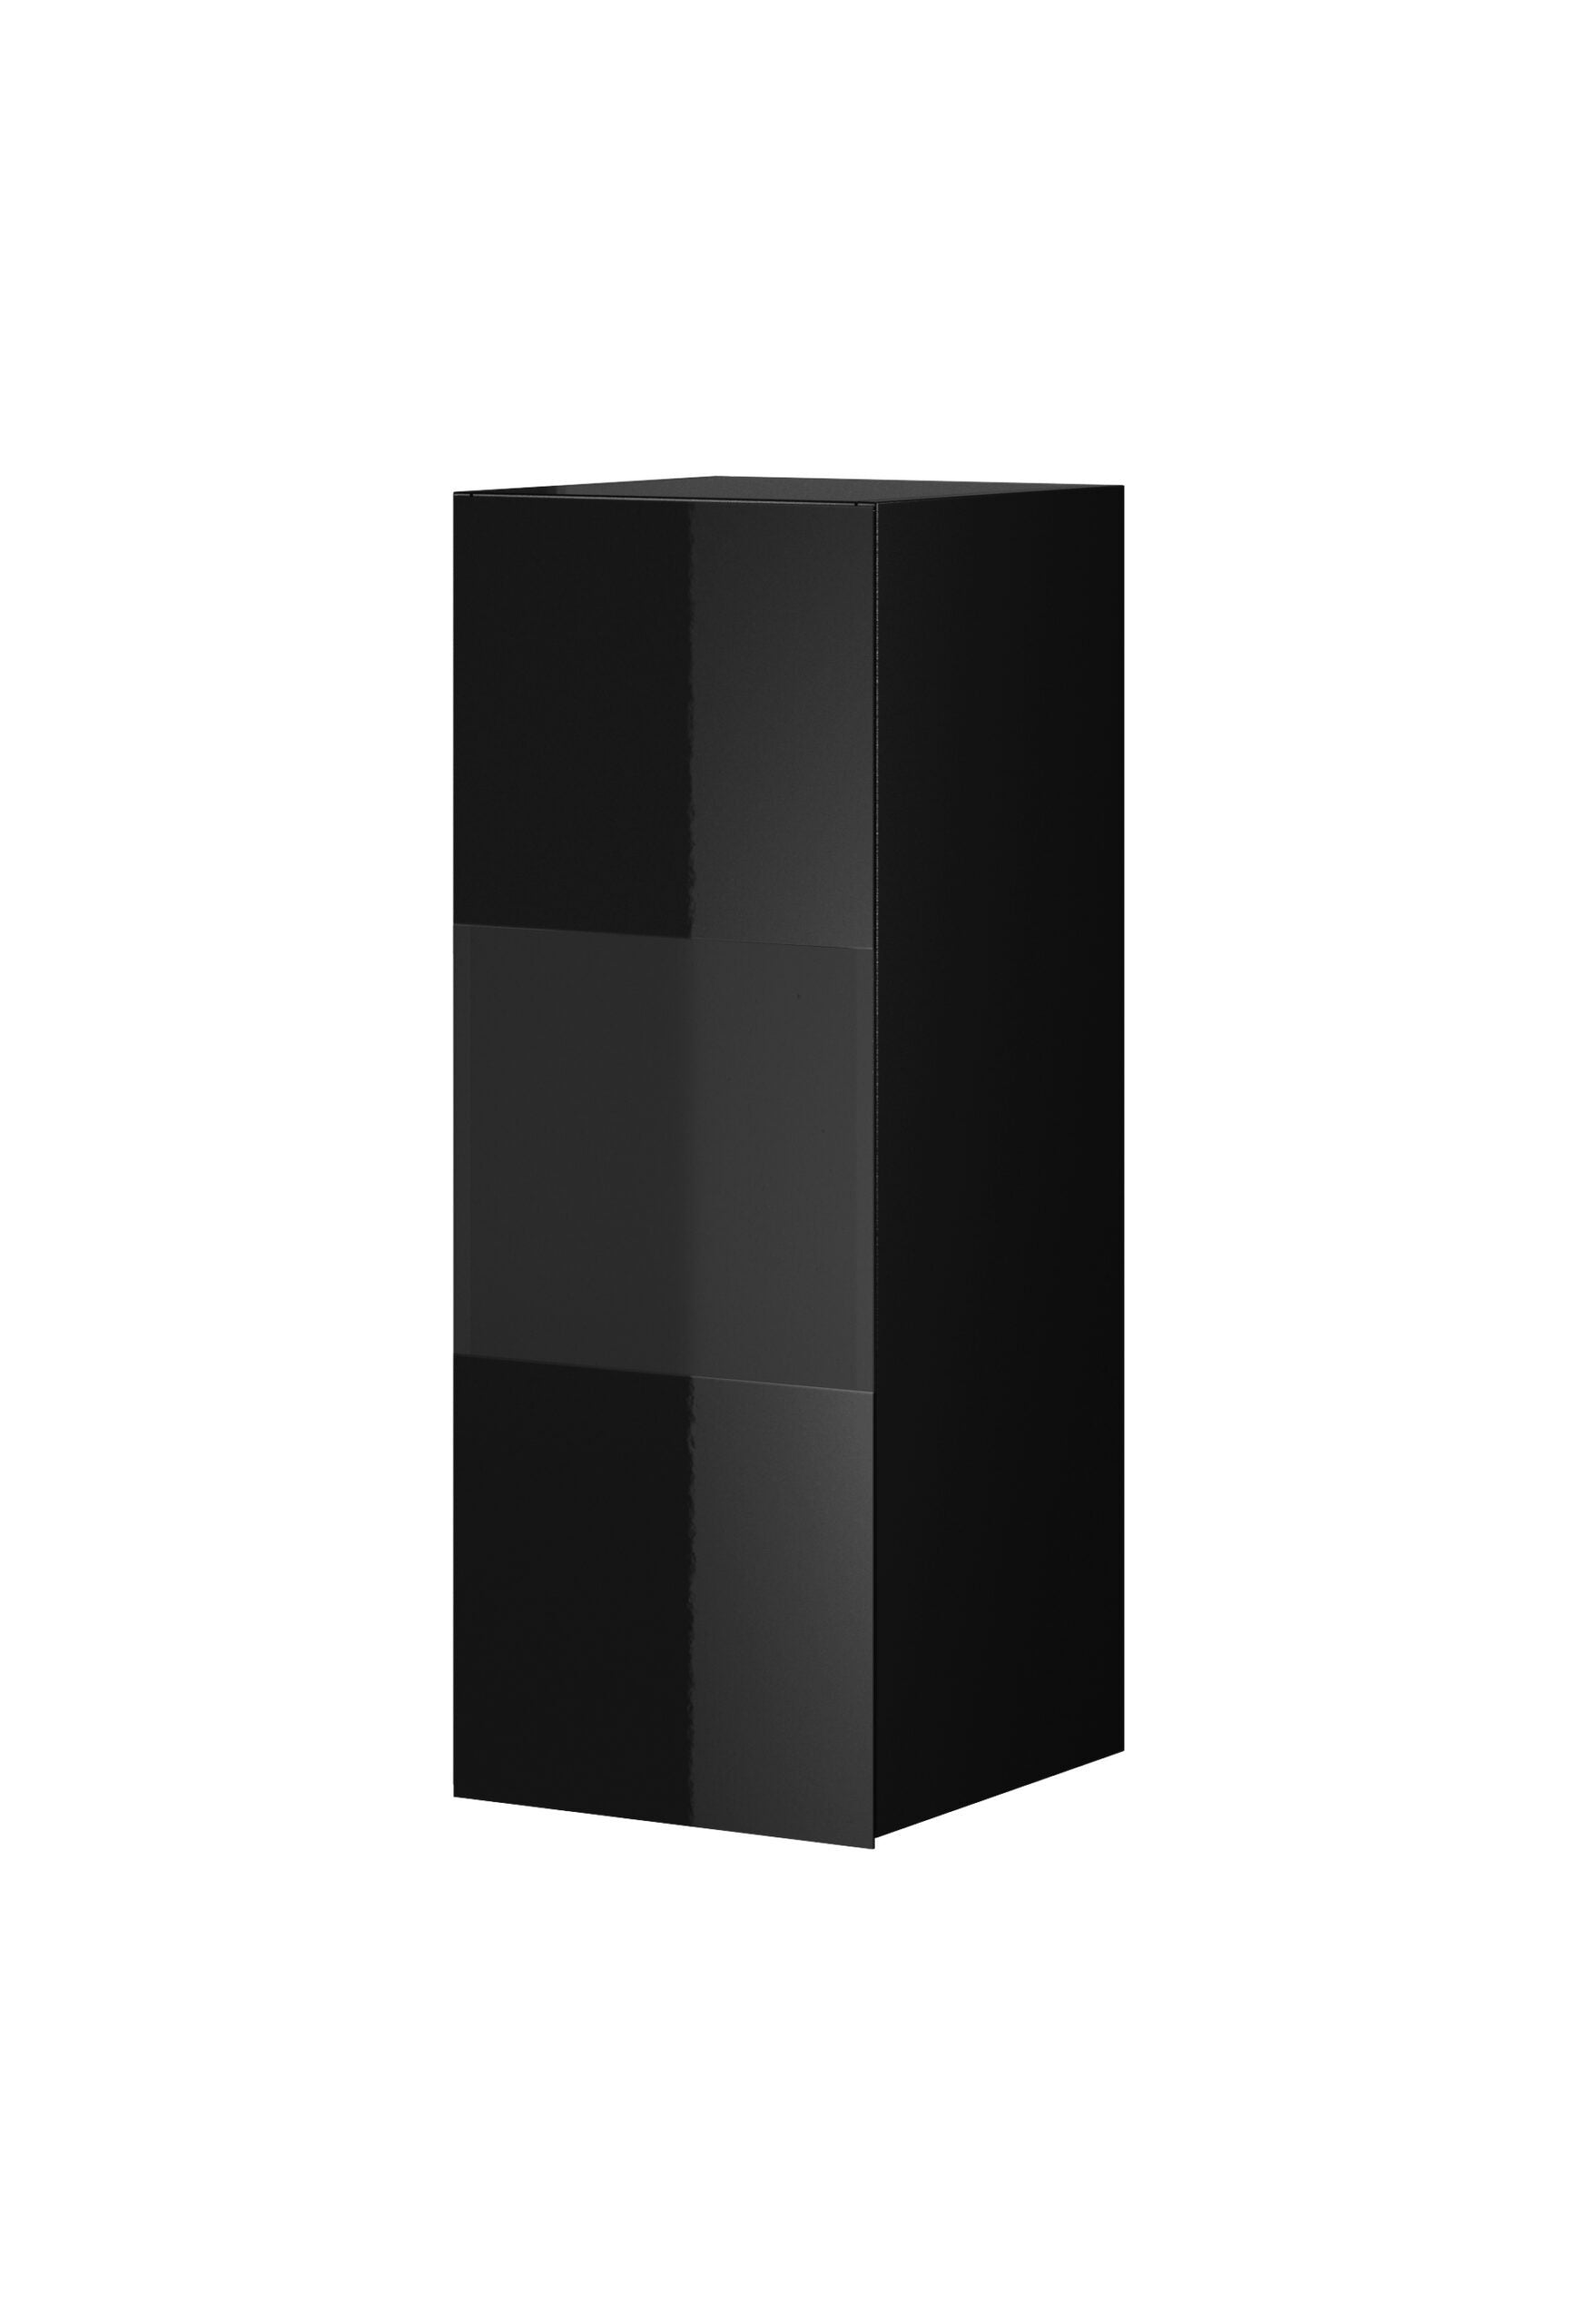 View Helio 07 Wall Display Cabinet Black Glass 35cm information